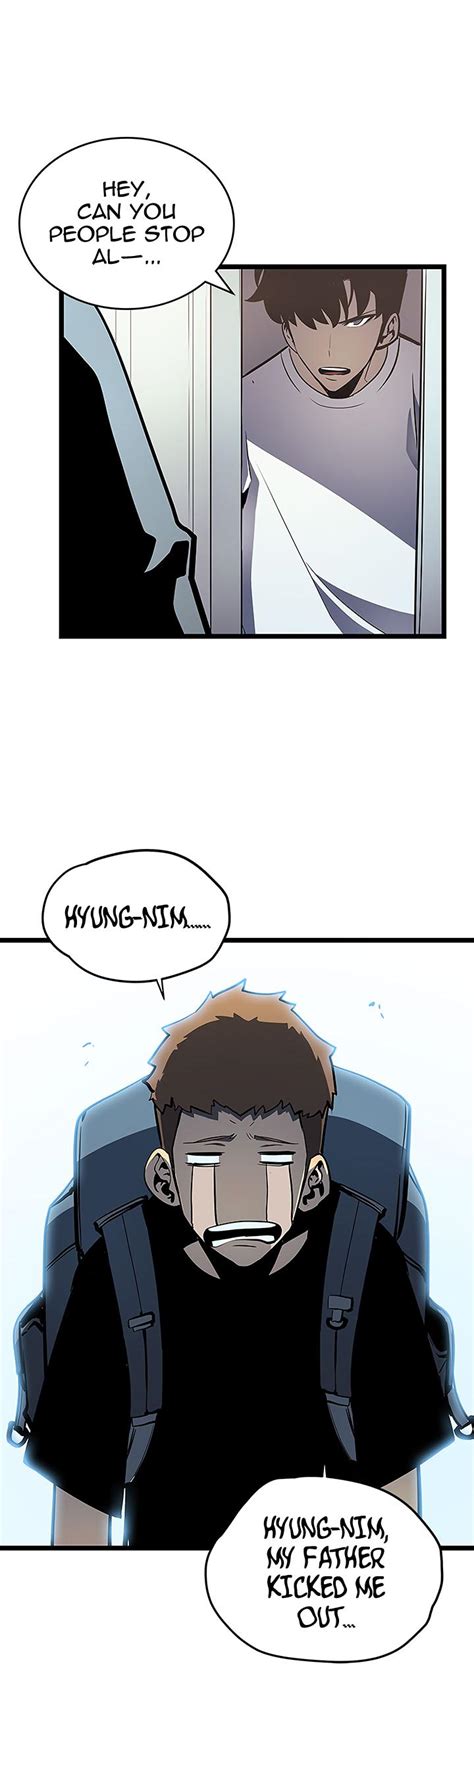 In april 13, 2018, a webtoon serialization started in korean mobile site kakaopage drawn by artists hyeon. Read Solo Leveling Manga Chapter 79 - Webtoonily